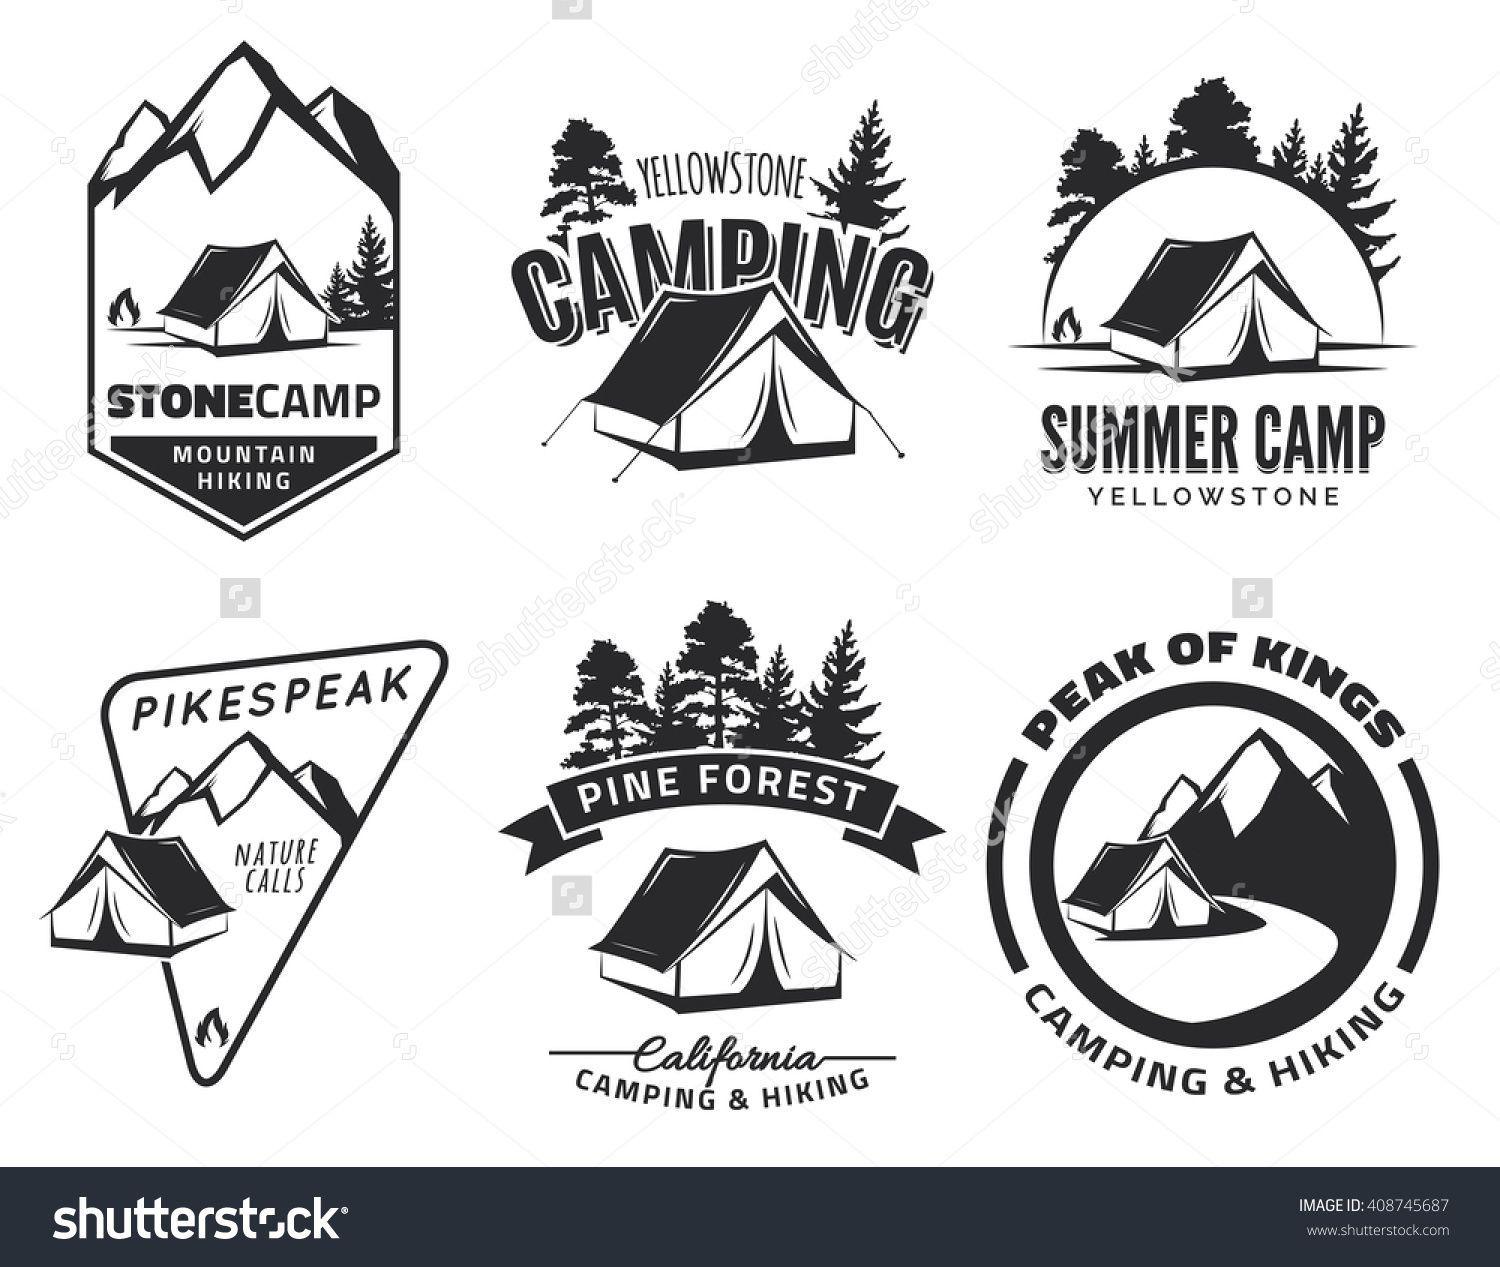 Camping Logo - Set of vintage camping and outdoor adventure emblems, logos